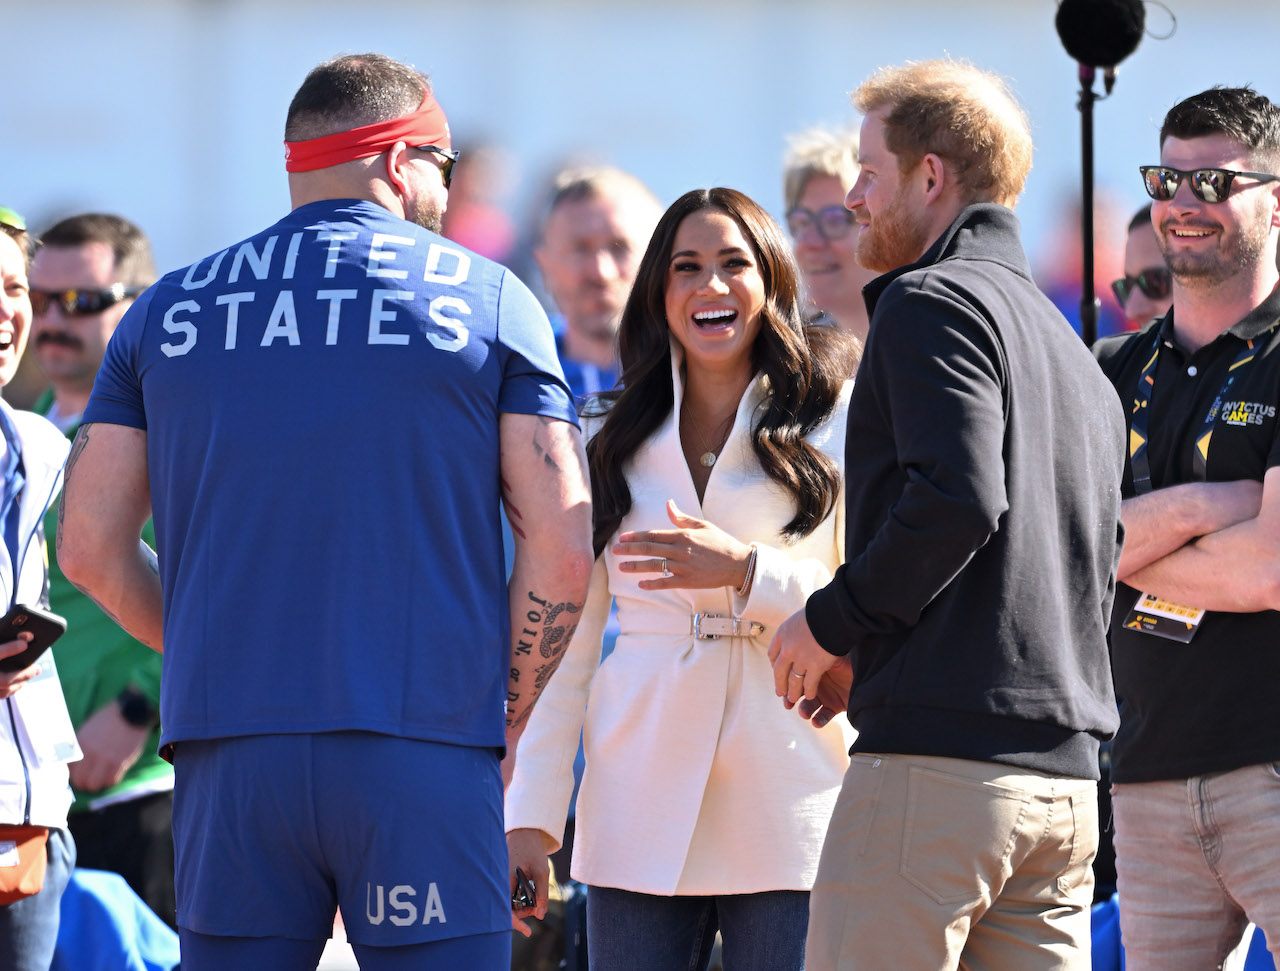 Prince Harry, Duke of Sussex and Meghan, Duchess of Sussex attend the athletics event during the Invictus Games at Zuiderpark on April 17, 2022.